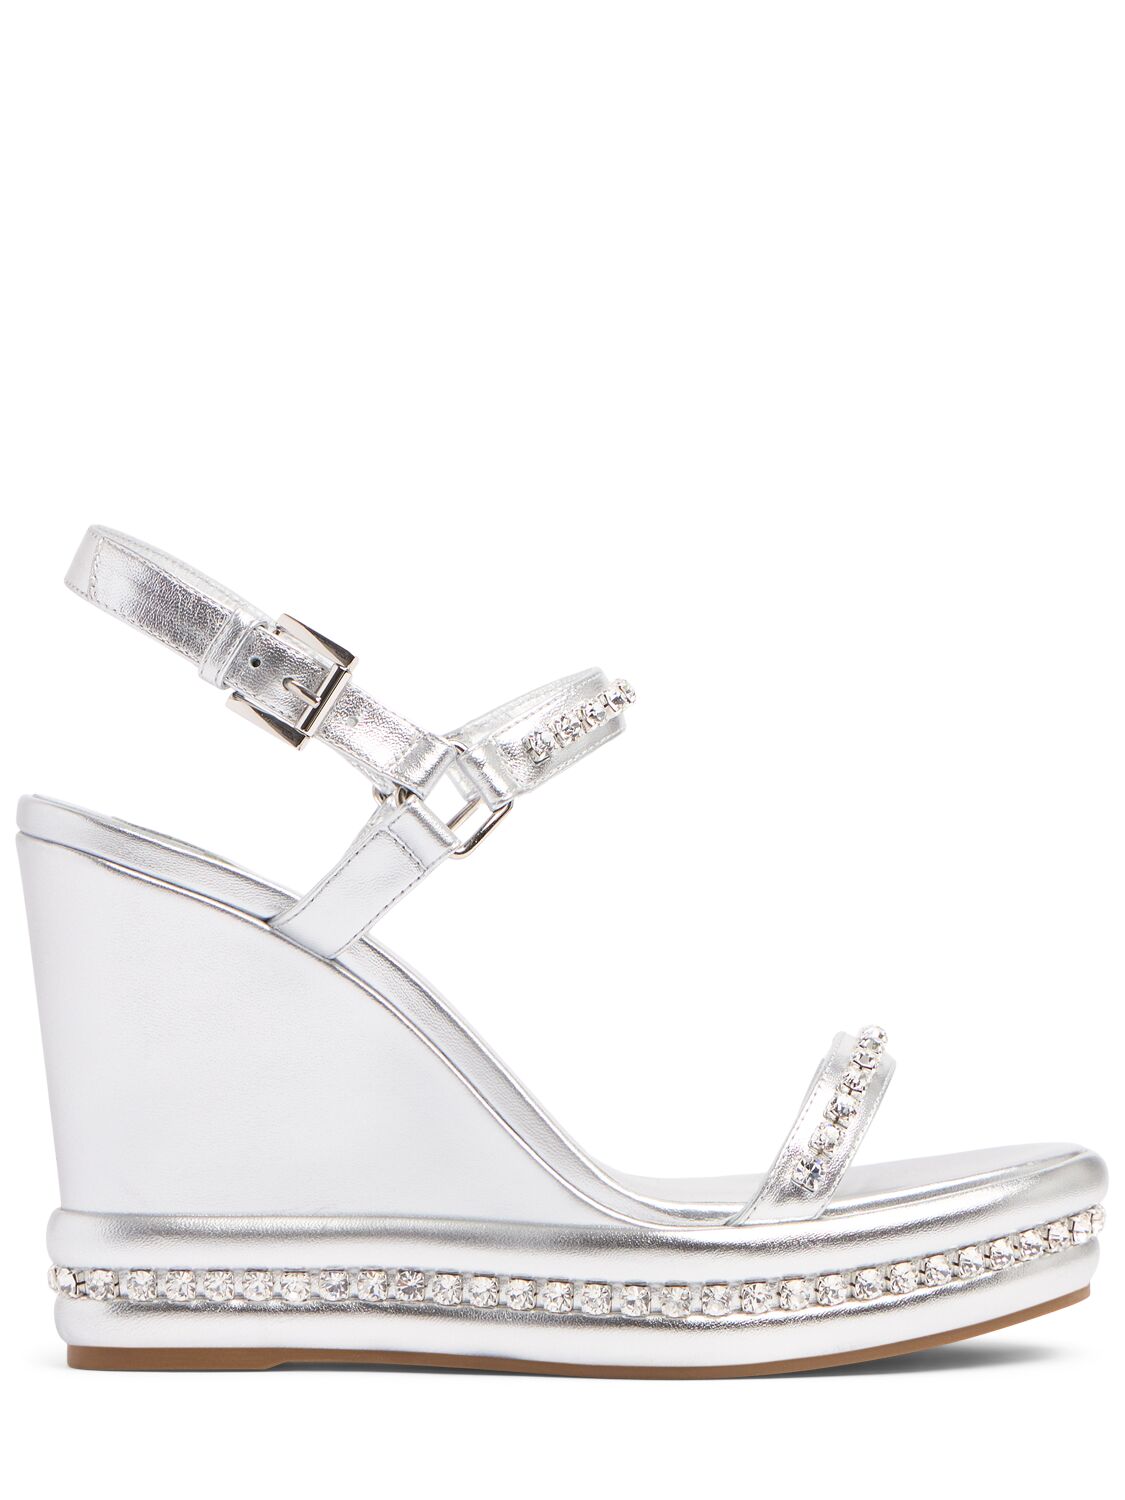 Christian Louboutin 110mm Pyrastrass Leather Wedges In Silver